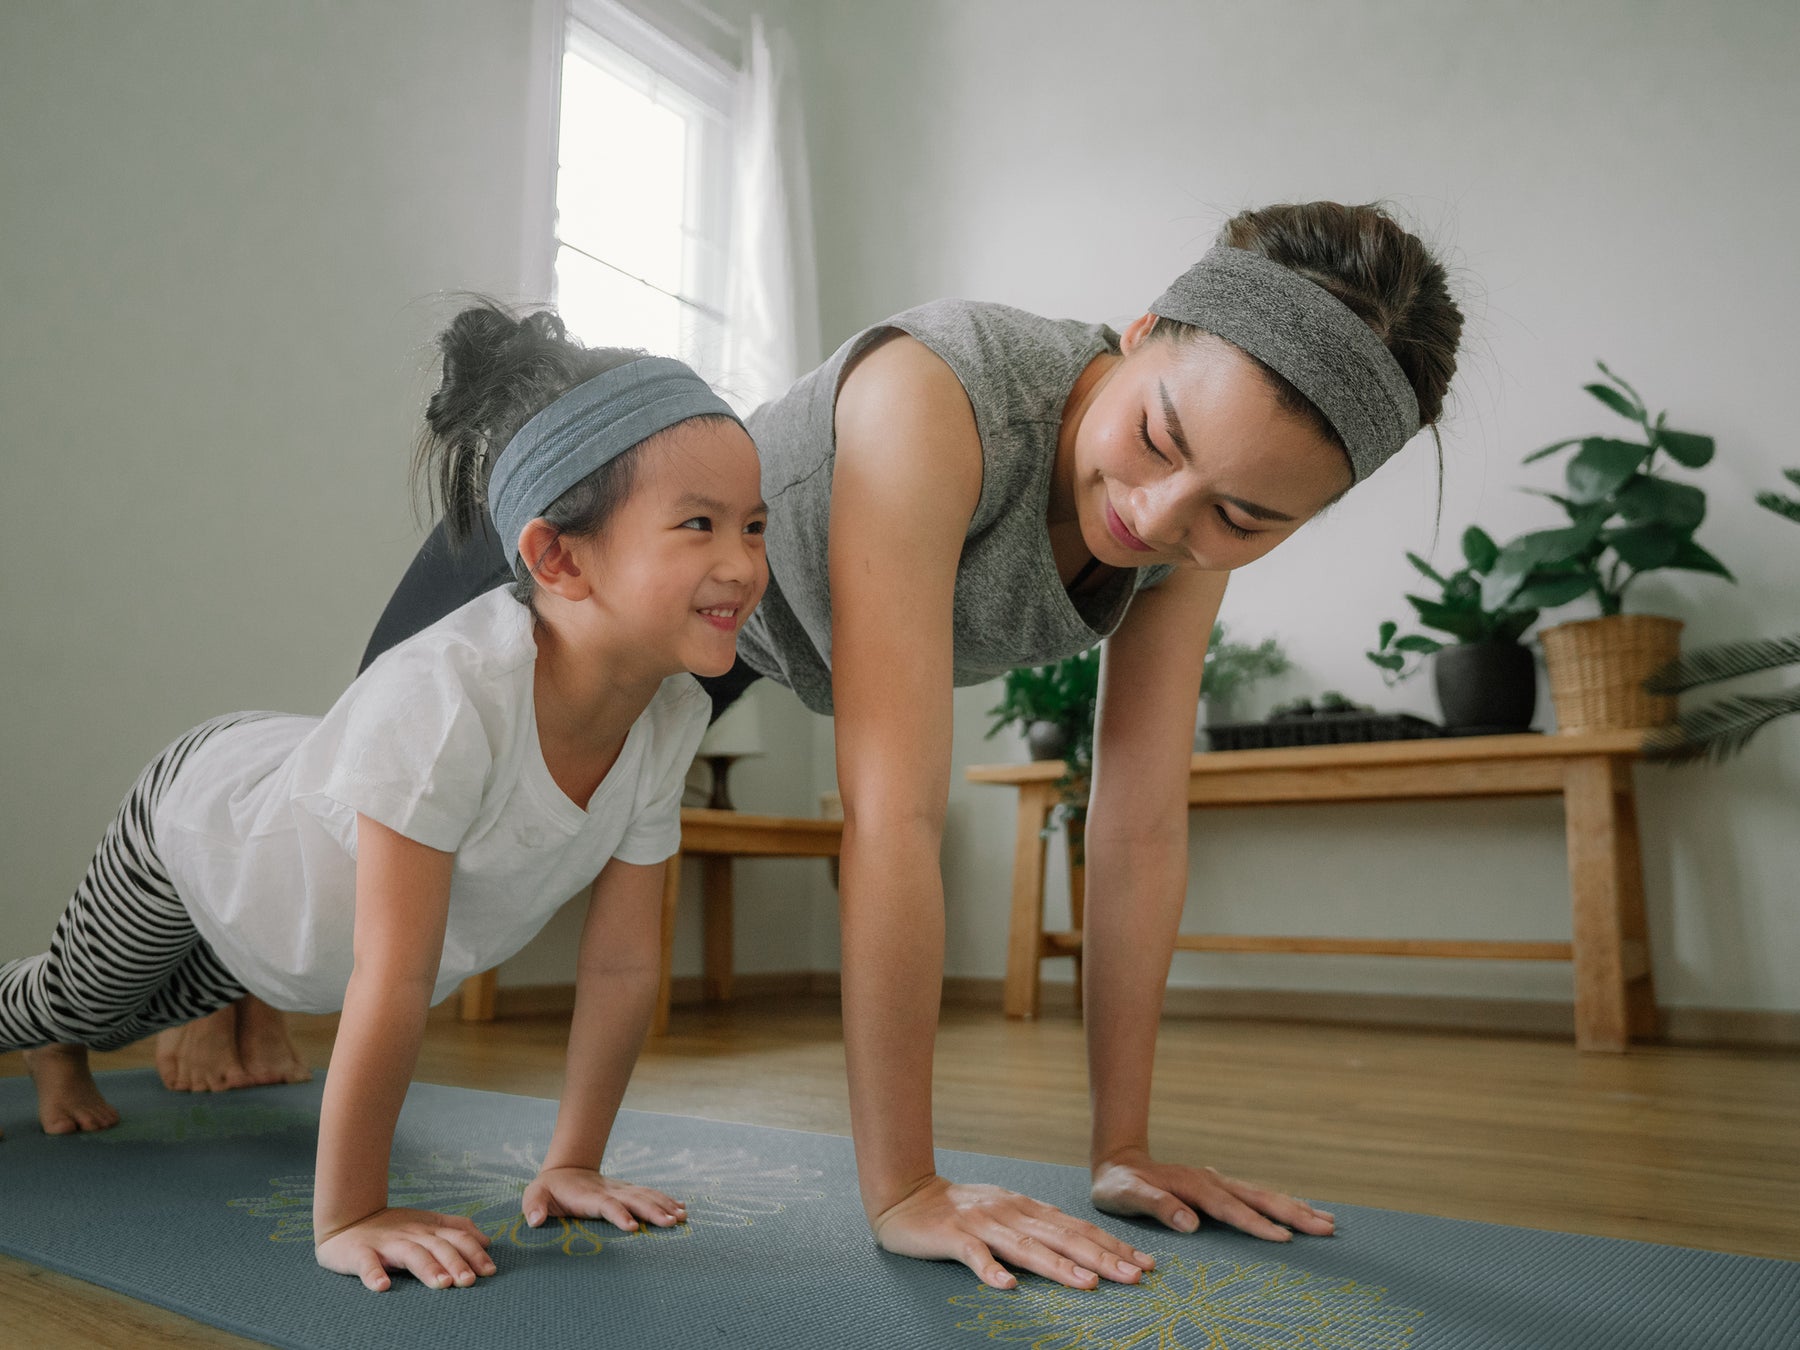 Fun Facts About KidsFit